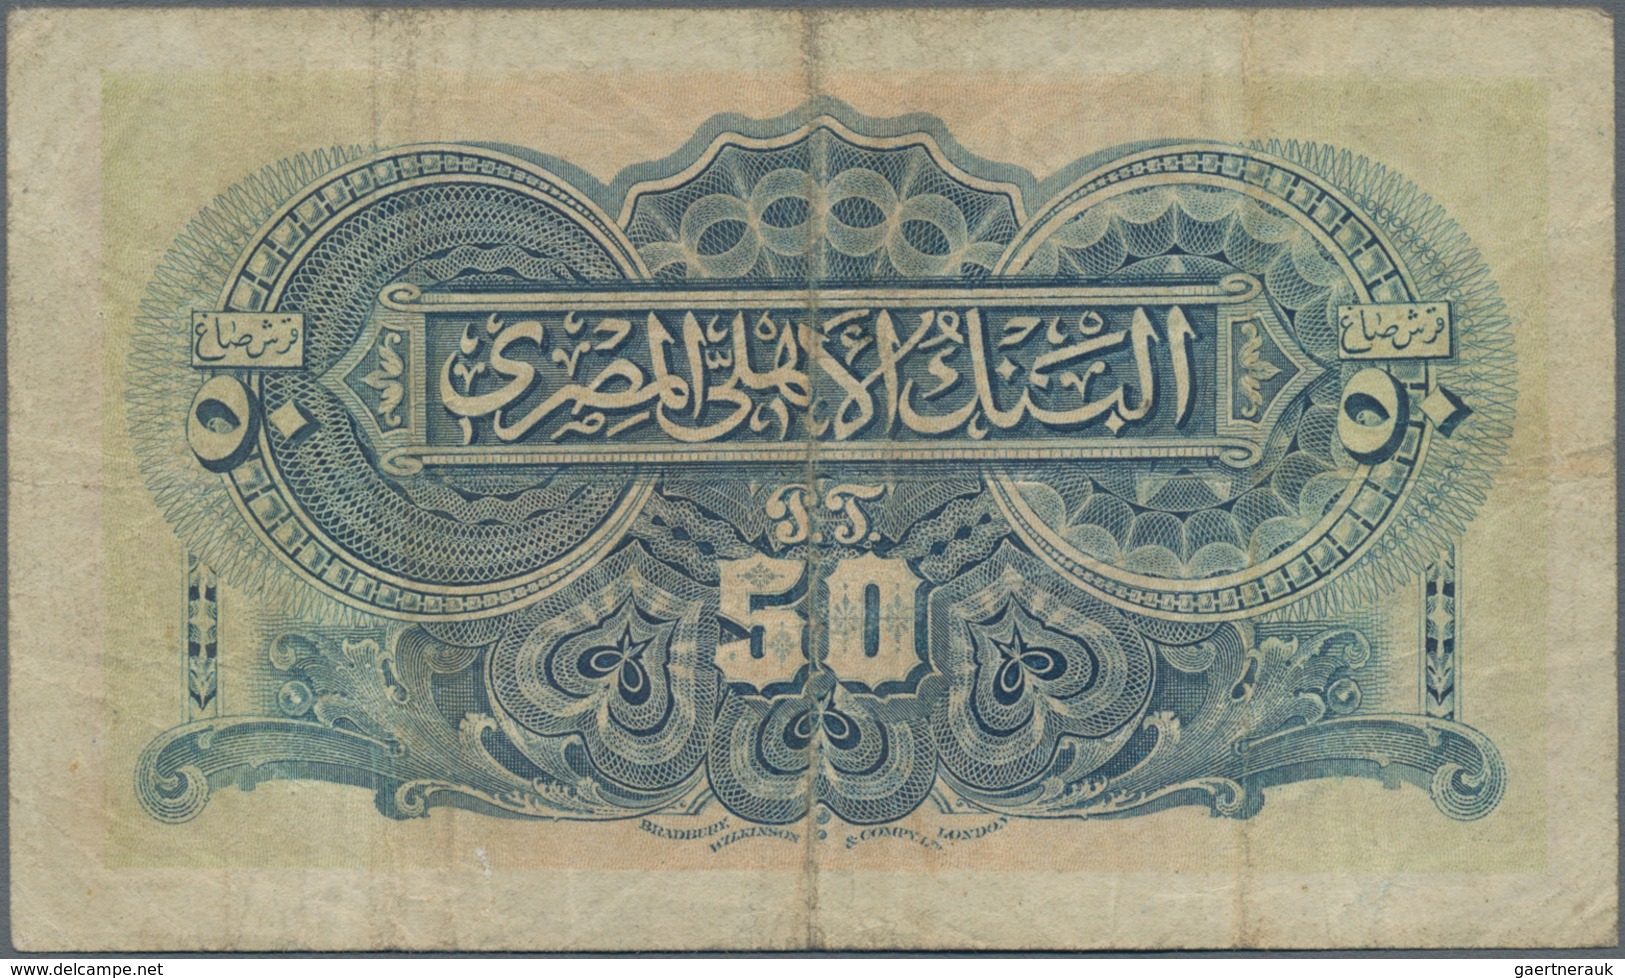 Egypt / Ägypten: National Bank Of Egypt 50 Piastres June 5th 1917, P.11, Great Note In Nice Original - Aegypten